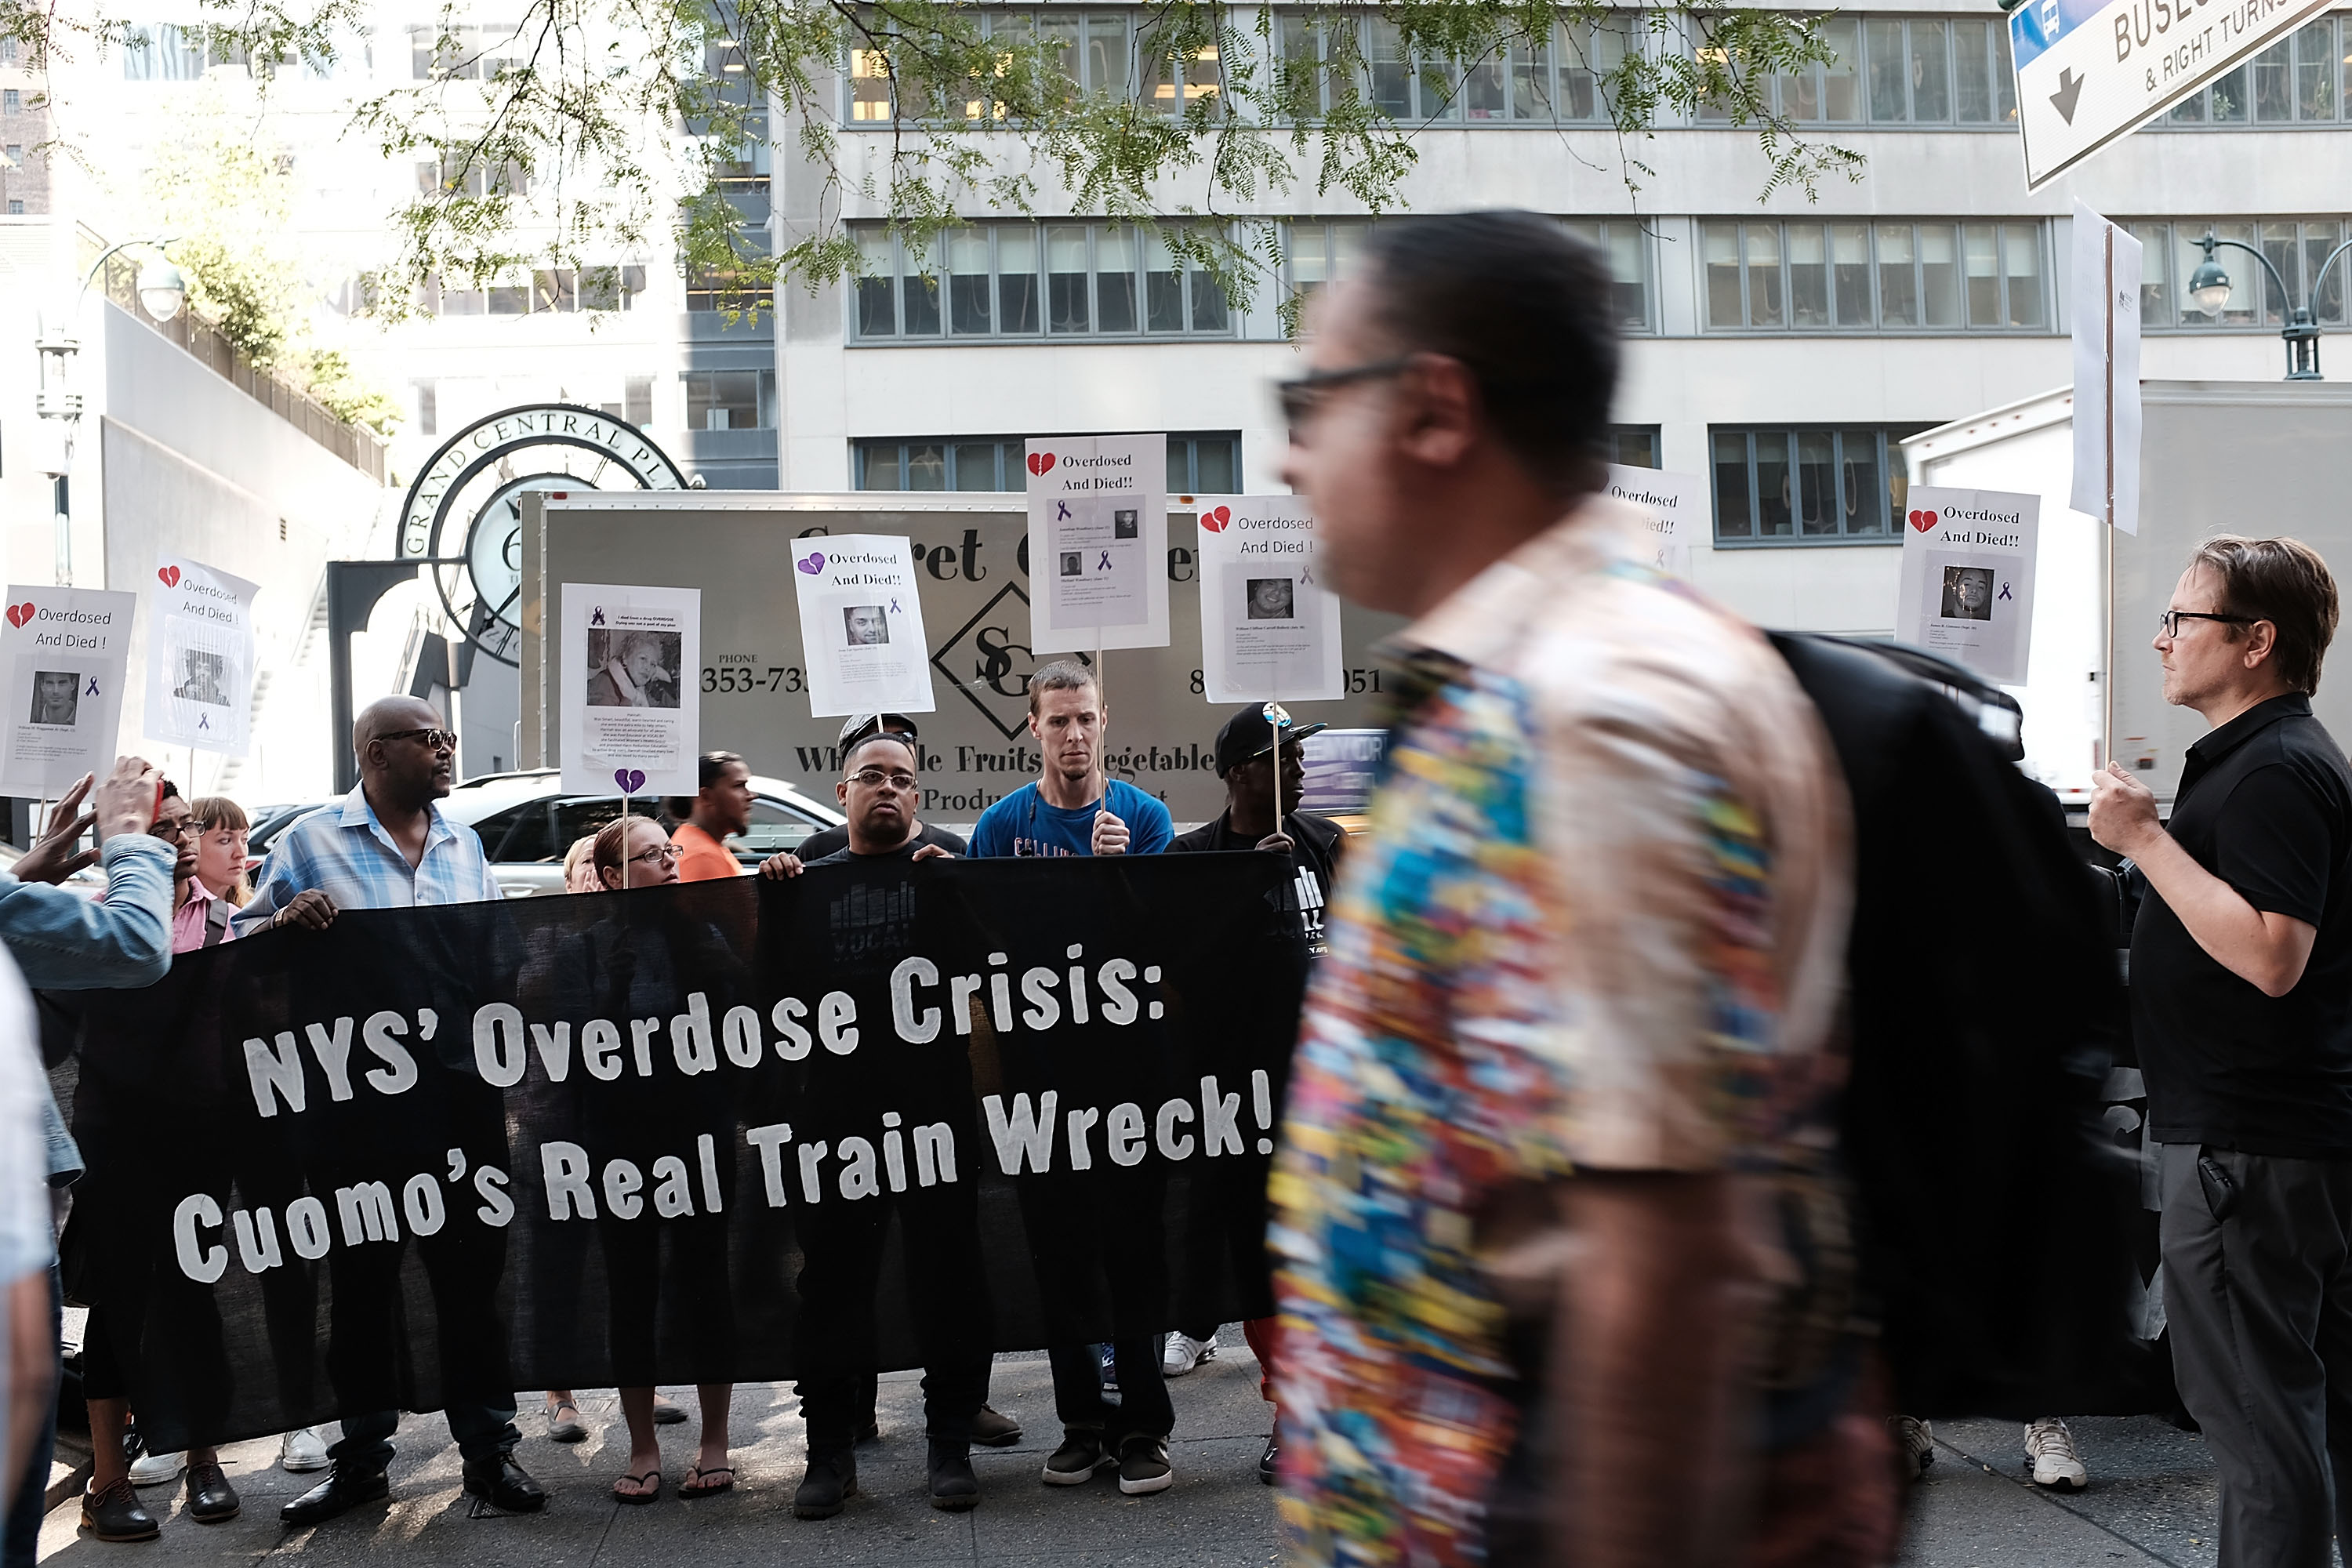 Recovering drug users, activists and social service providers hold a morning rally calling for "bolder political action" in combating the overdose epidemic outside of the office of Governor Andrew Cuomo on August 17, 2017 in New York City. Spencer Platt/Getty Images